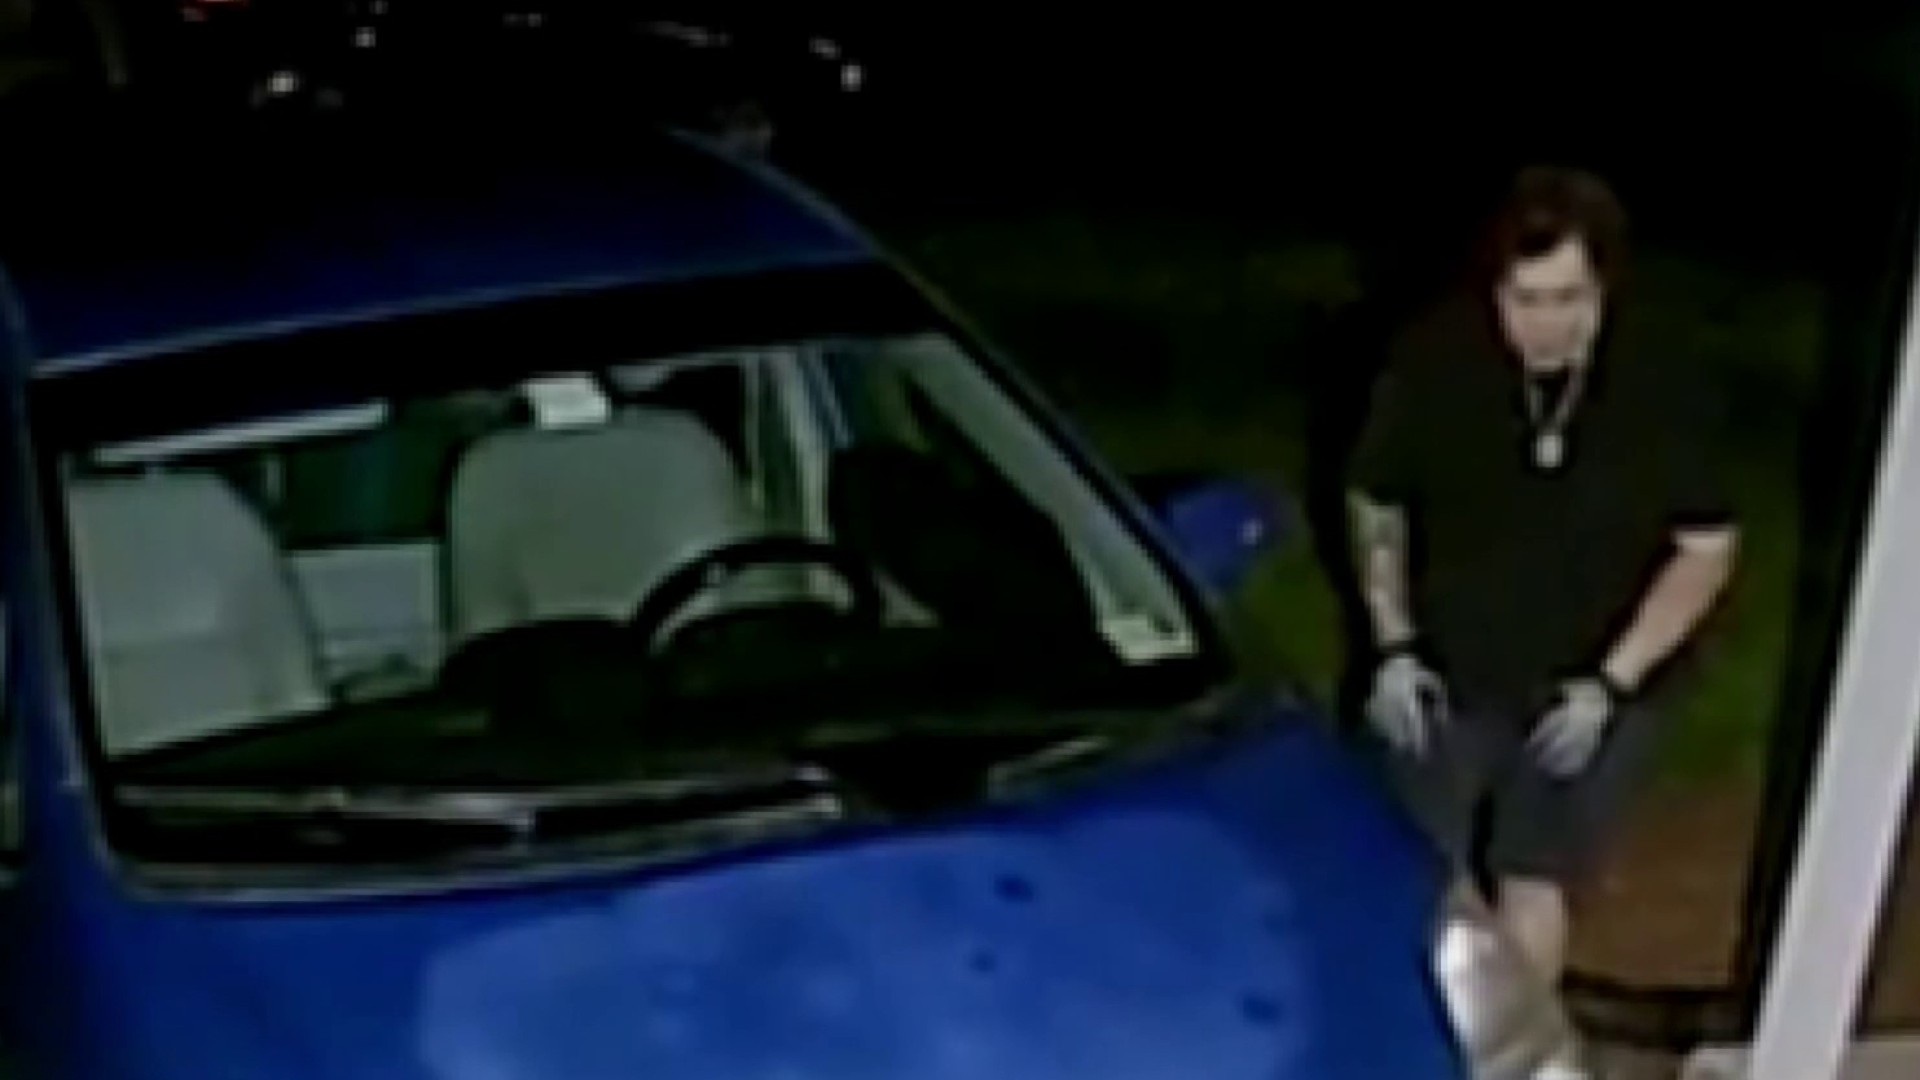 Thief Caught on Camera Stealing Catalytic Converter From Car in Rockville photo pic image